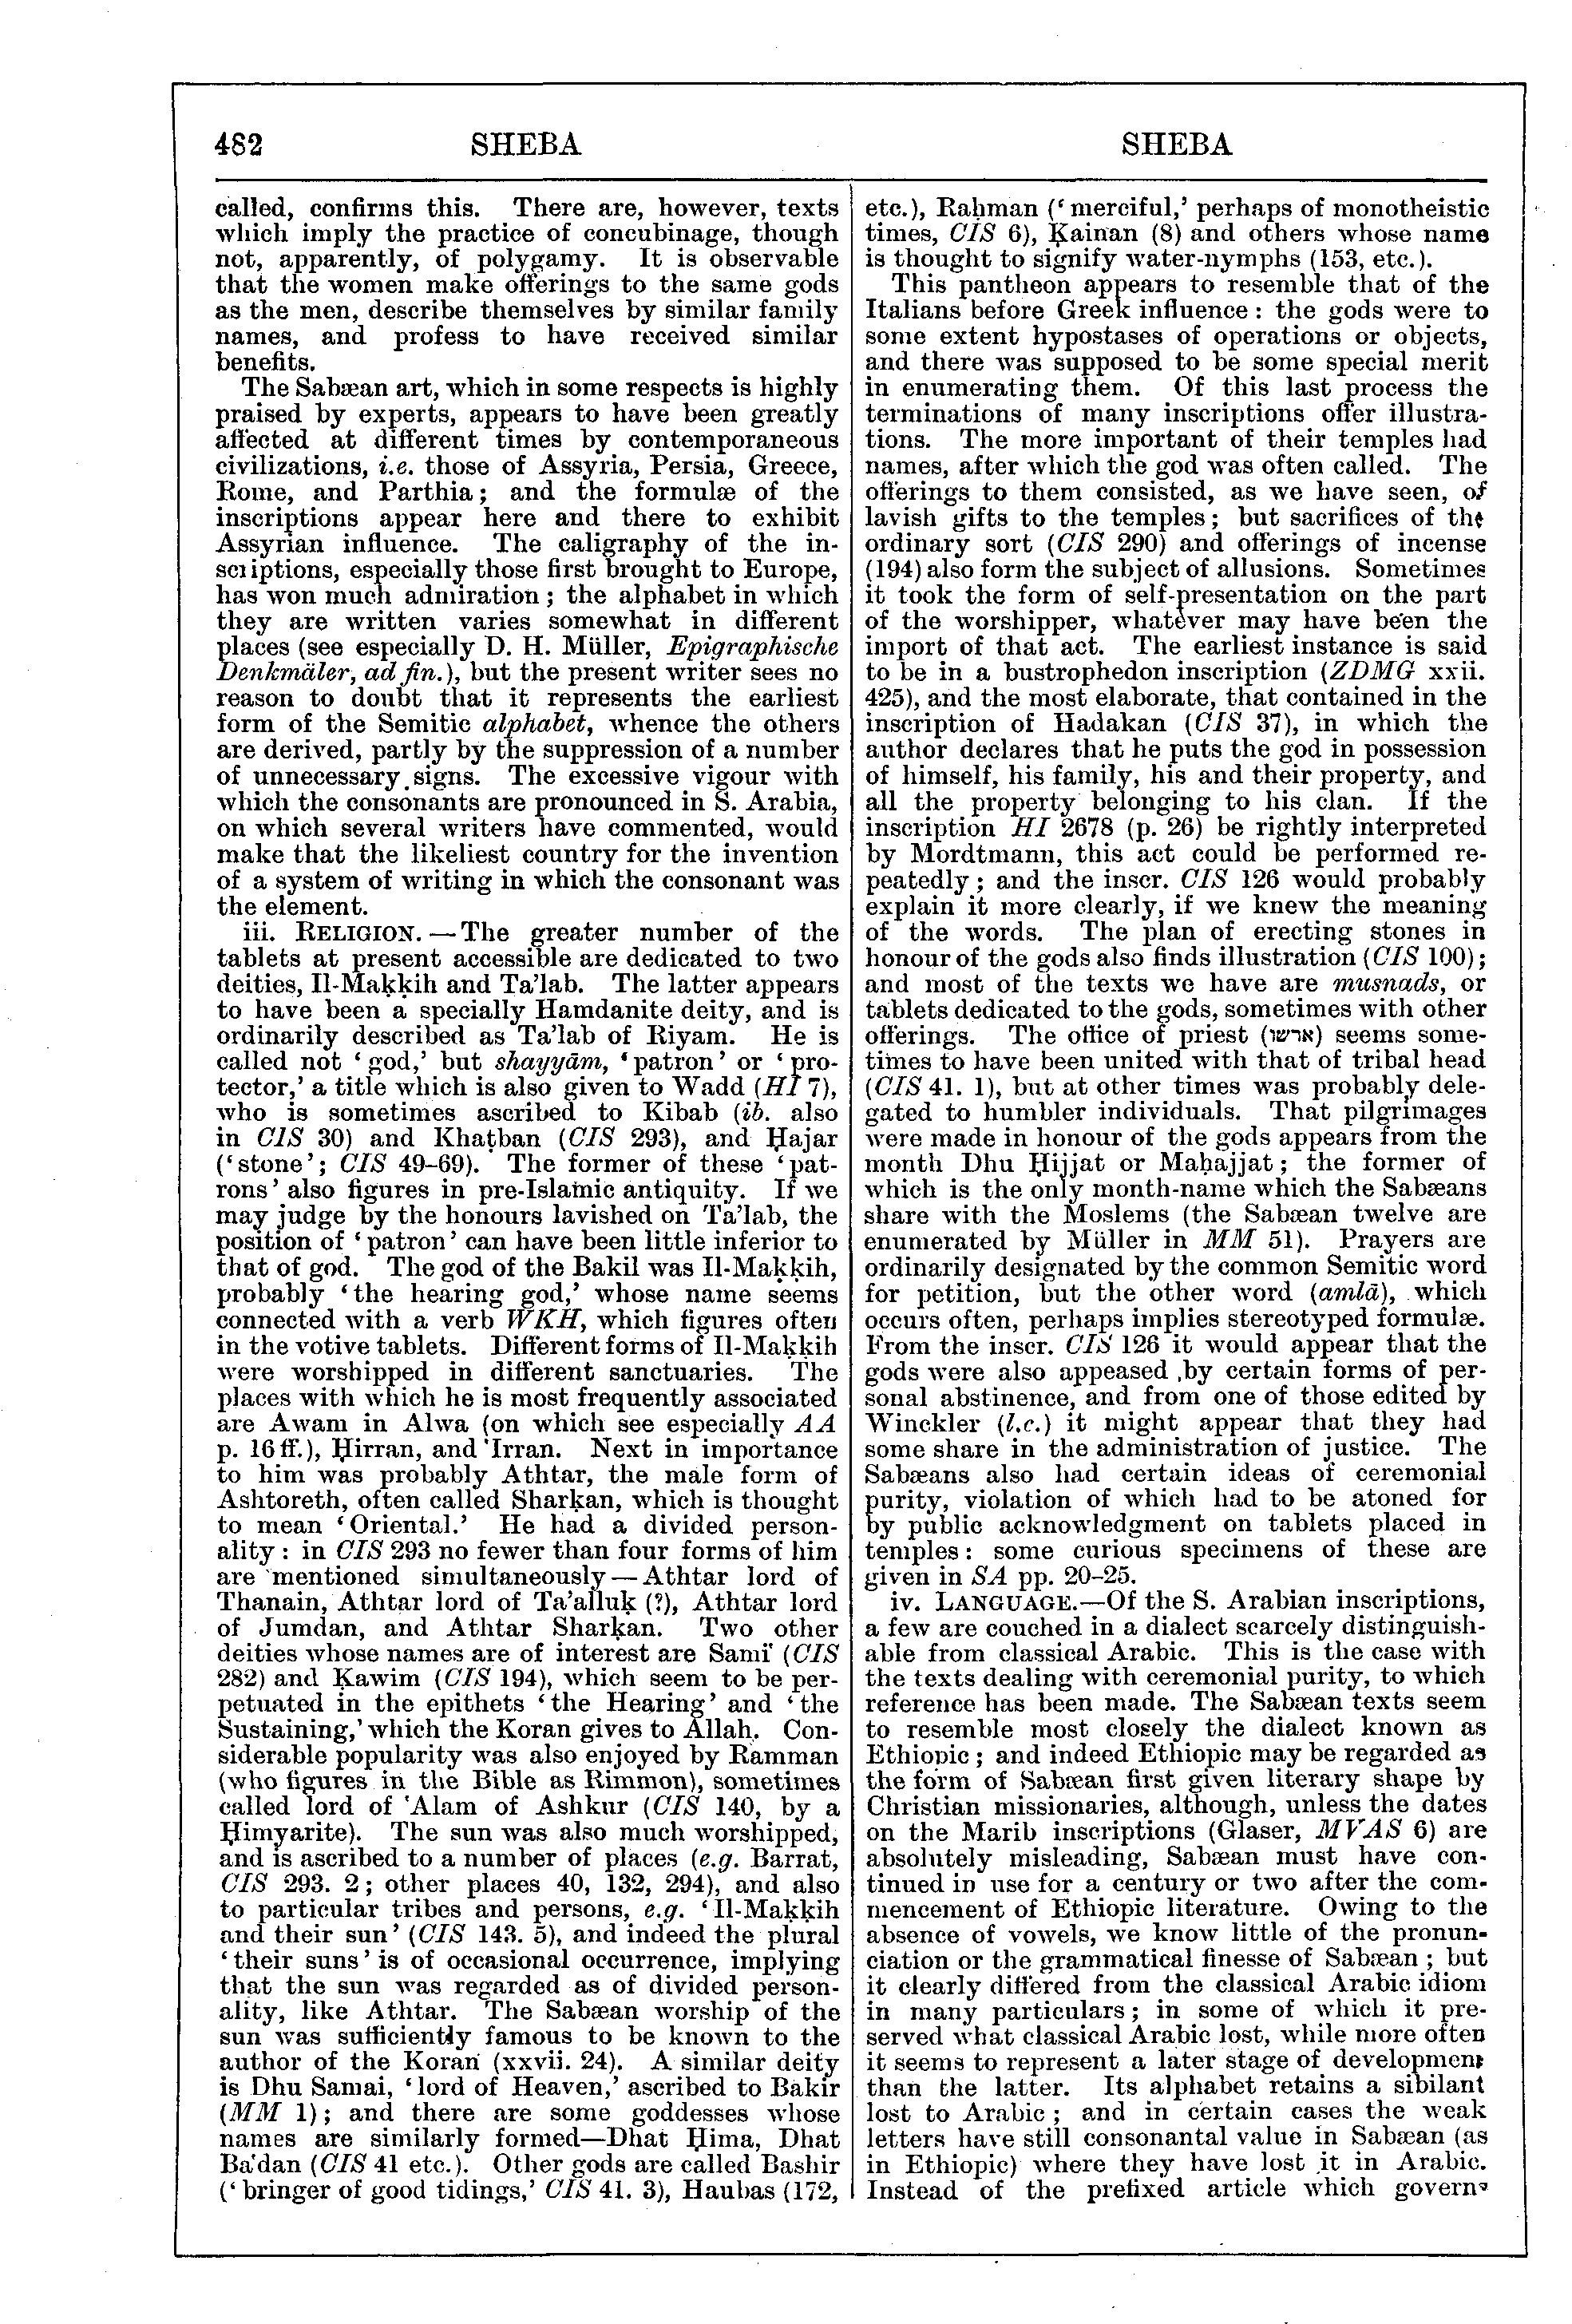 Image of page 482